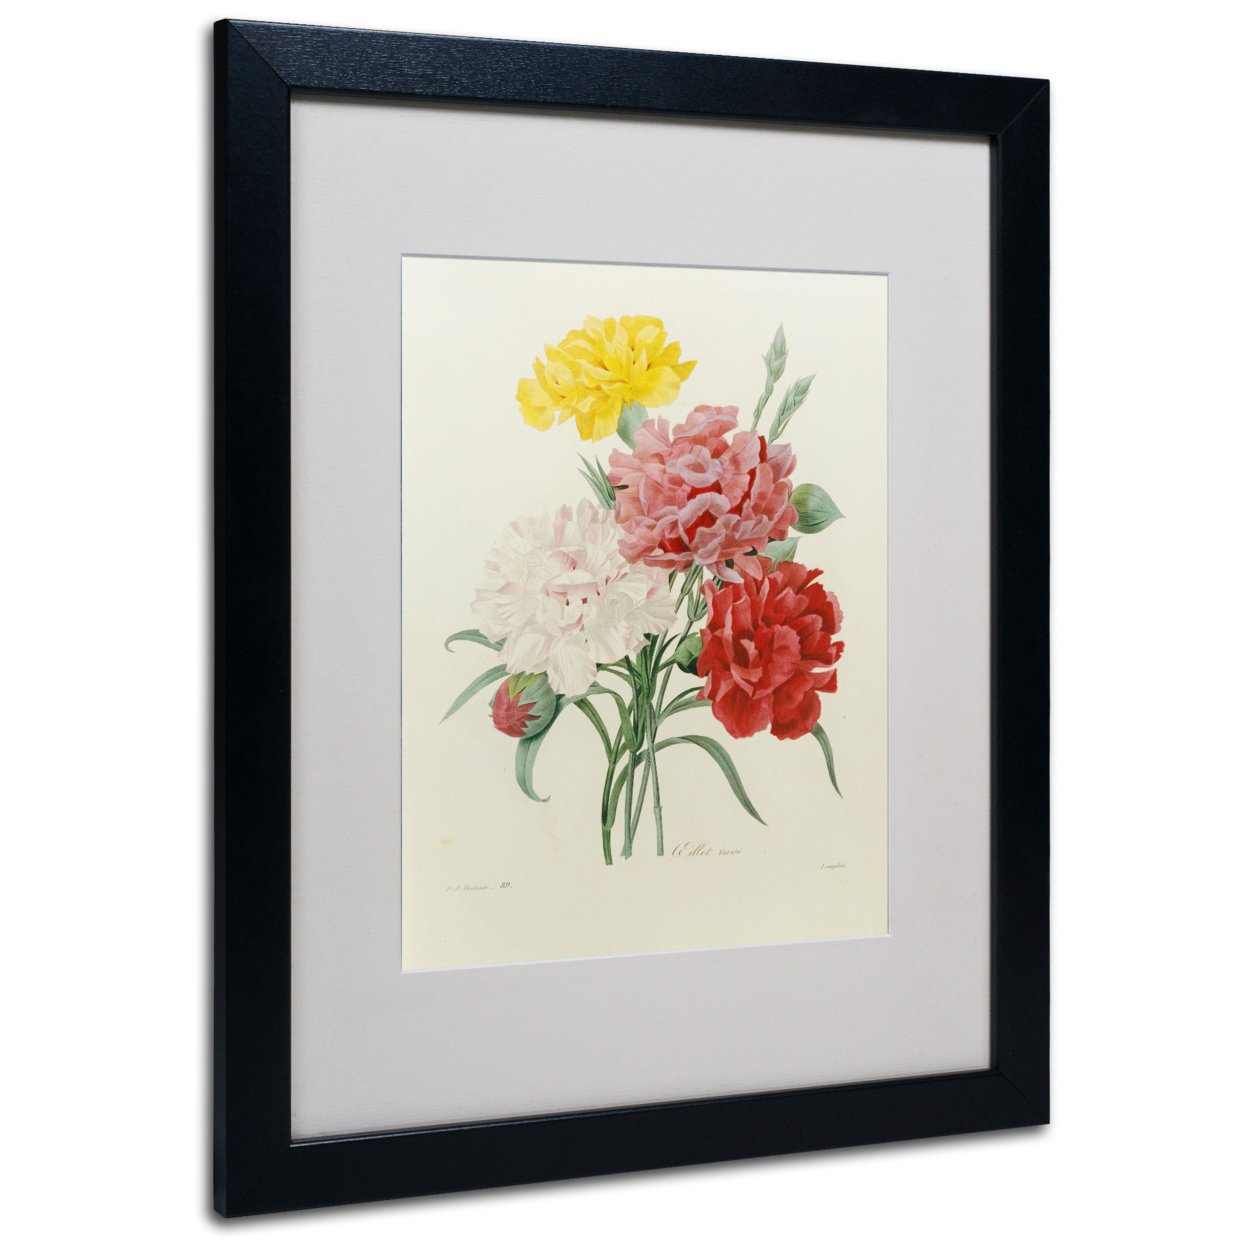 Joseph Redoute 'Carnations From Choix' Black Wooden Framed Art 18 X 22 Inches